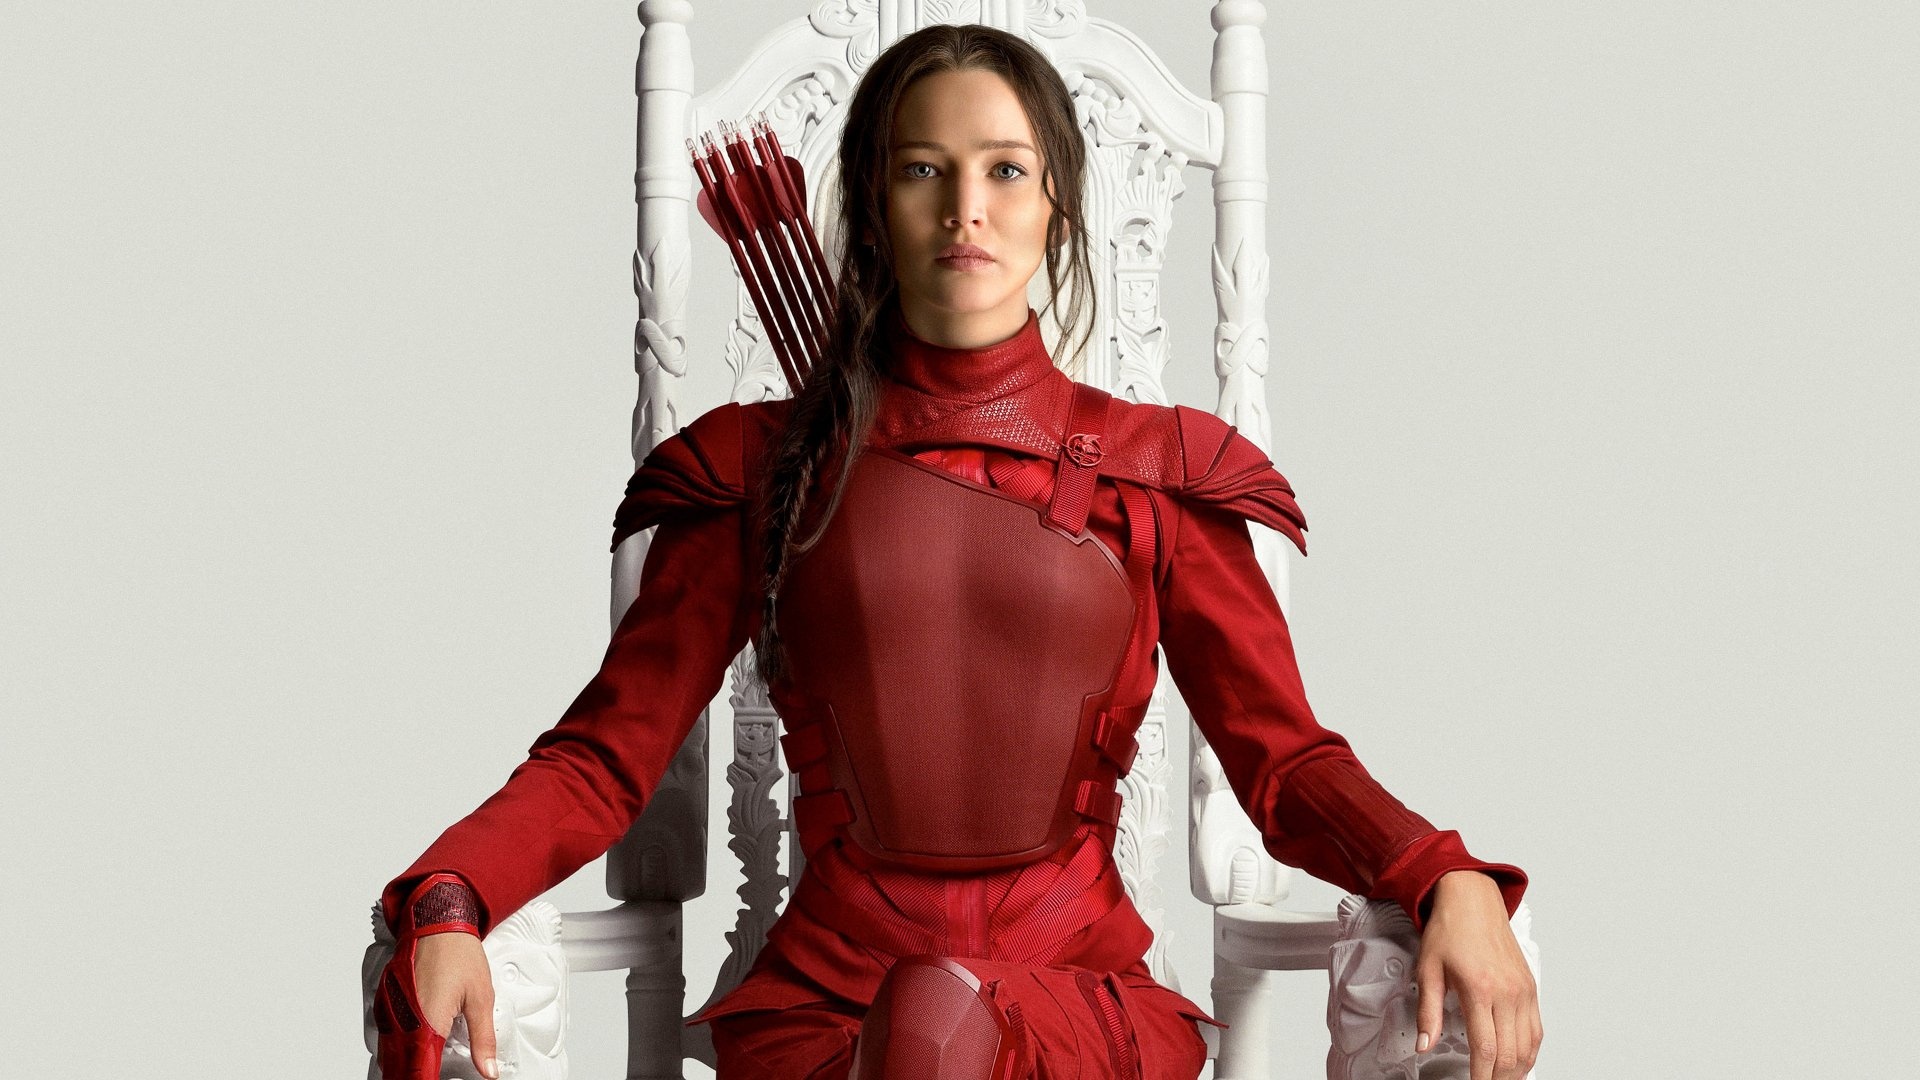 The Hunger Games, HD wallpapers, Background images, 1920x1080 Full HD Desktop